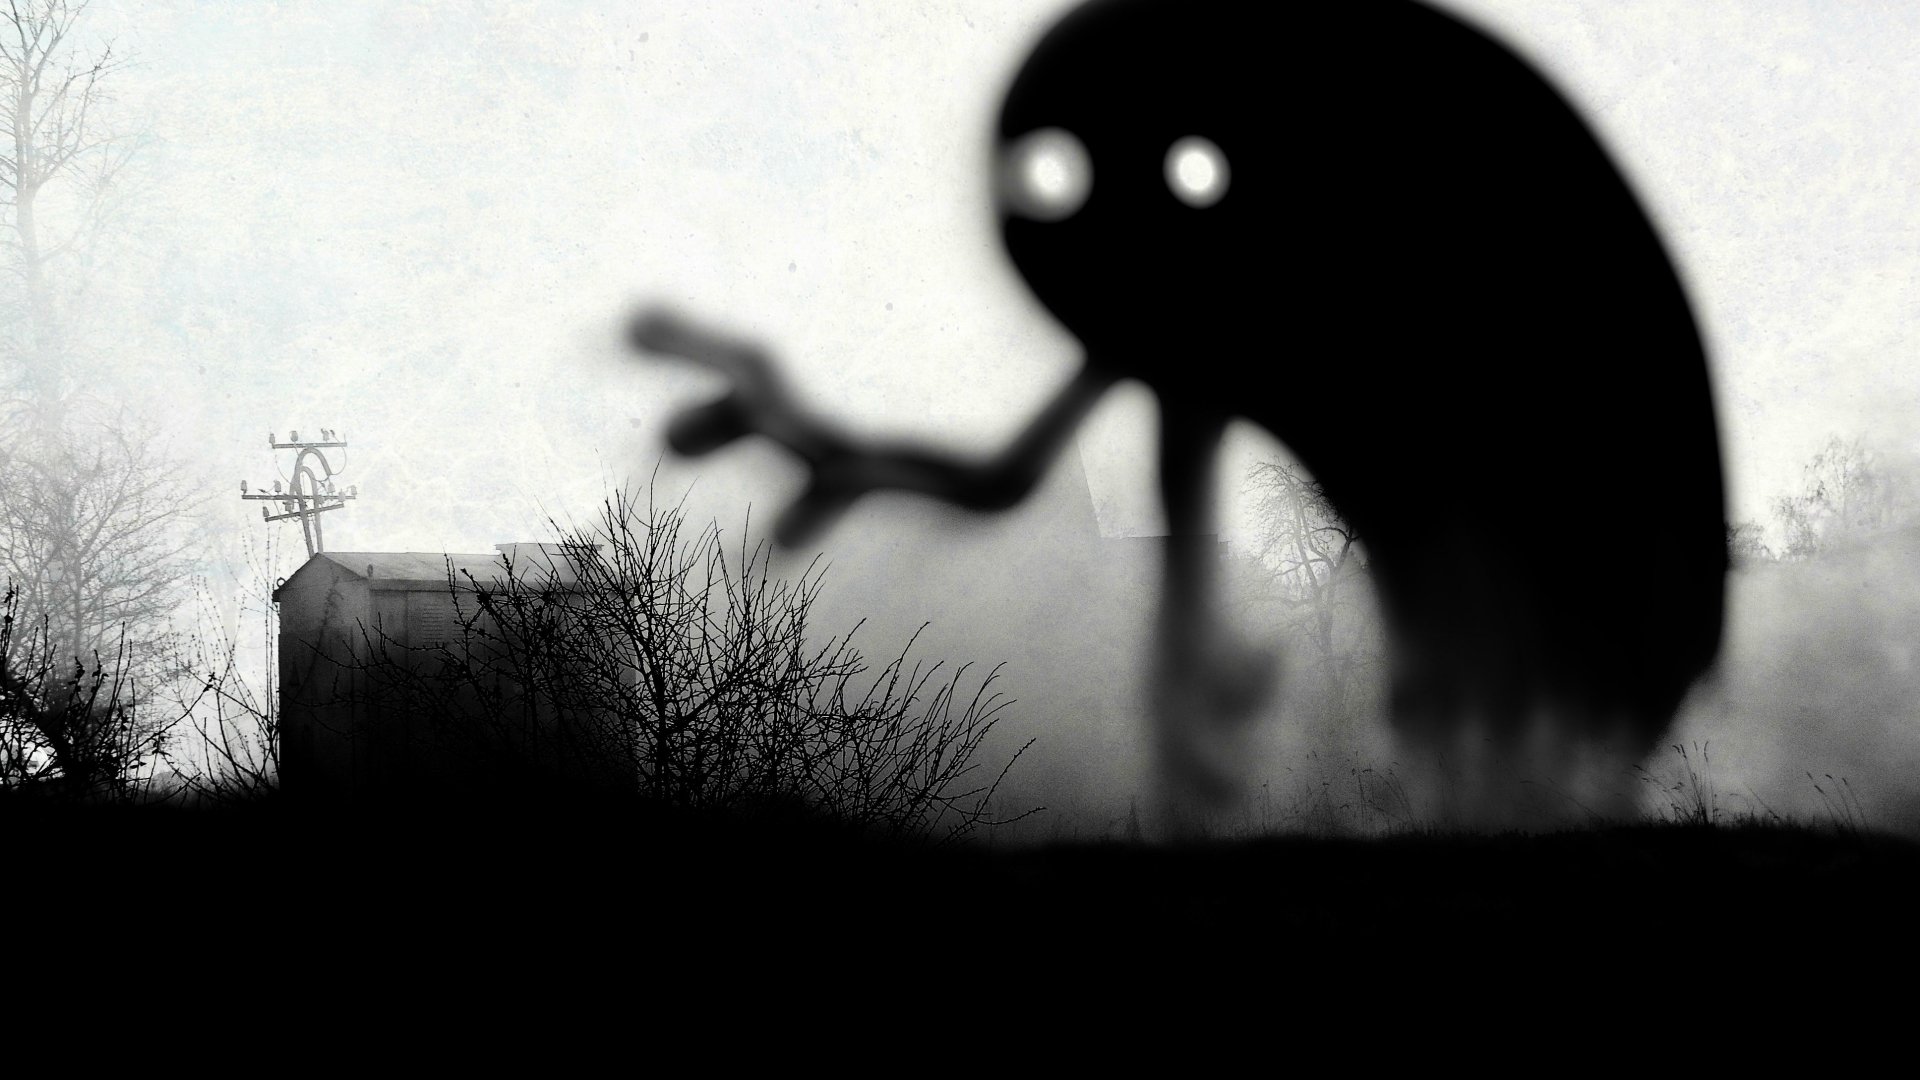 A black and white silhouette of a ghostly figure with two arms and two legs standing on a hillside. - Creepy, horror